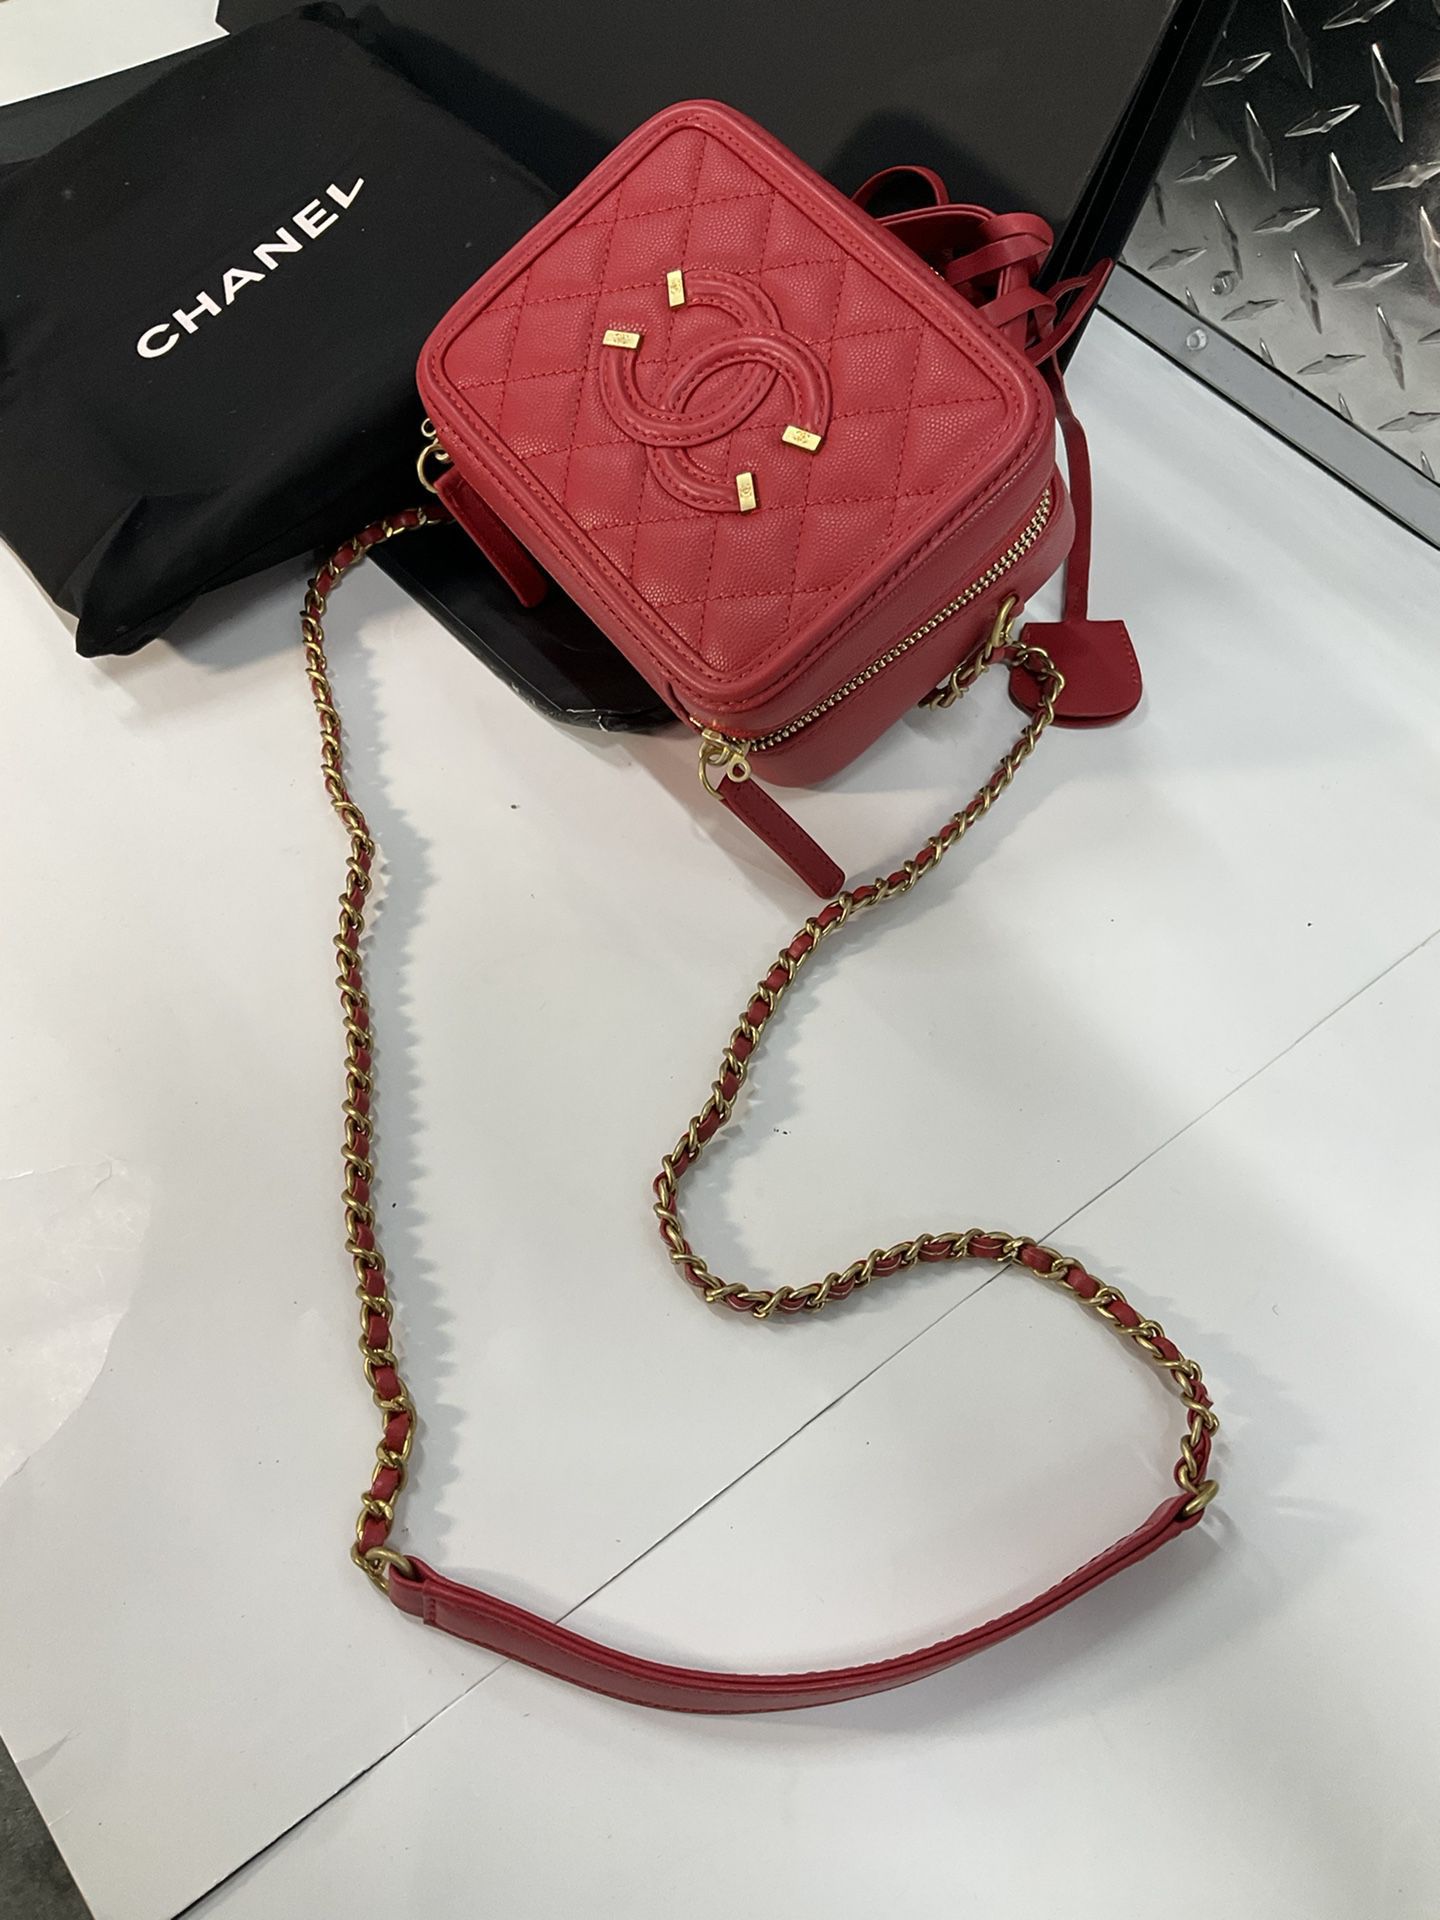 CHANEL BAG for Sale in Queens, NY - OfferUp